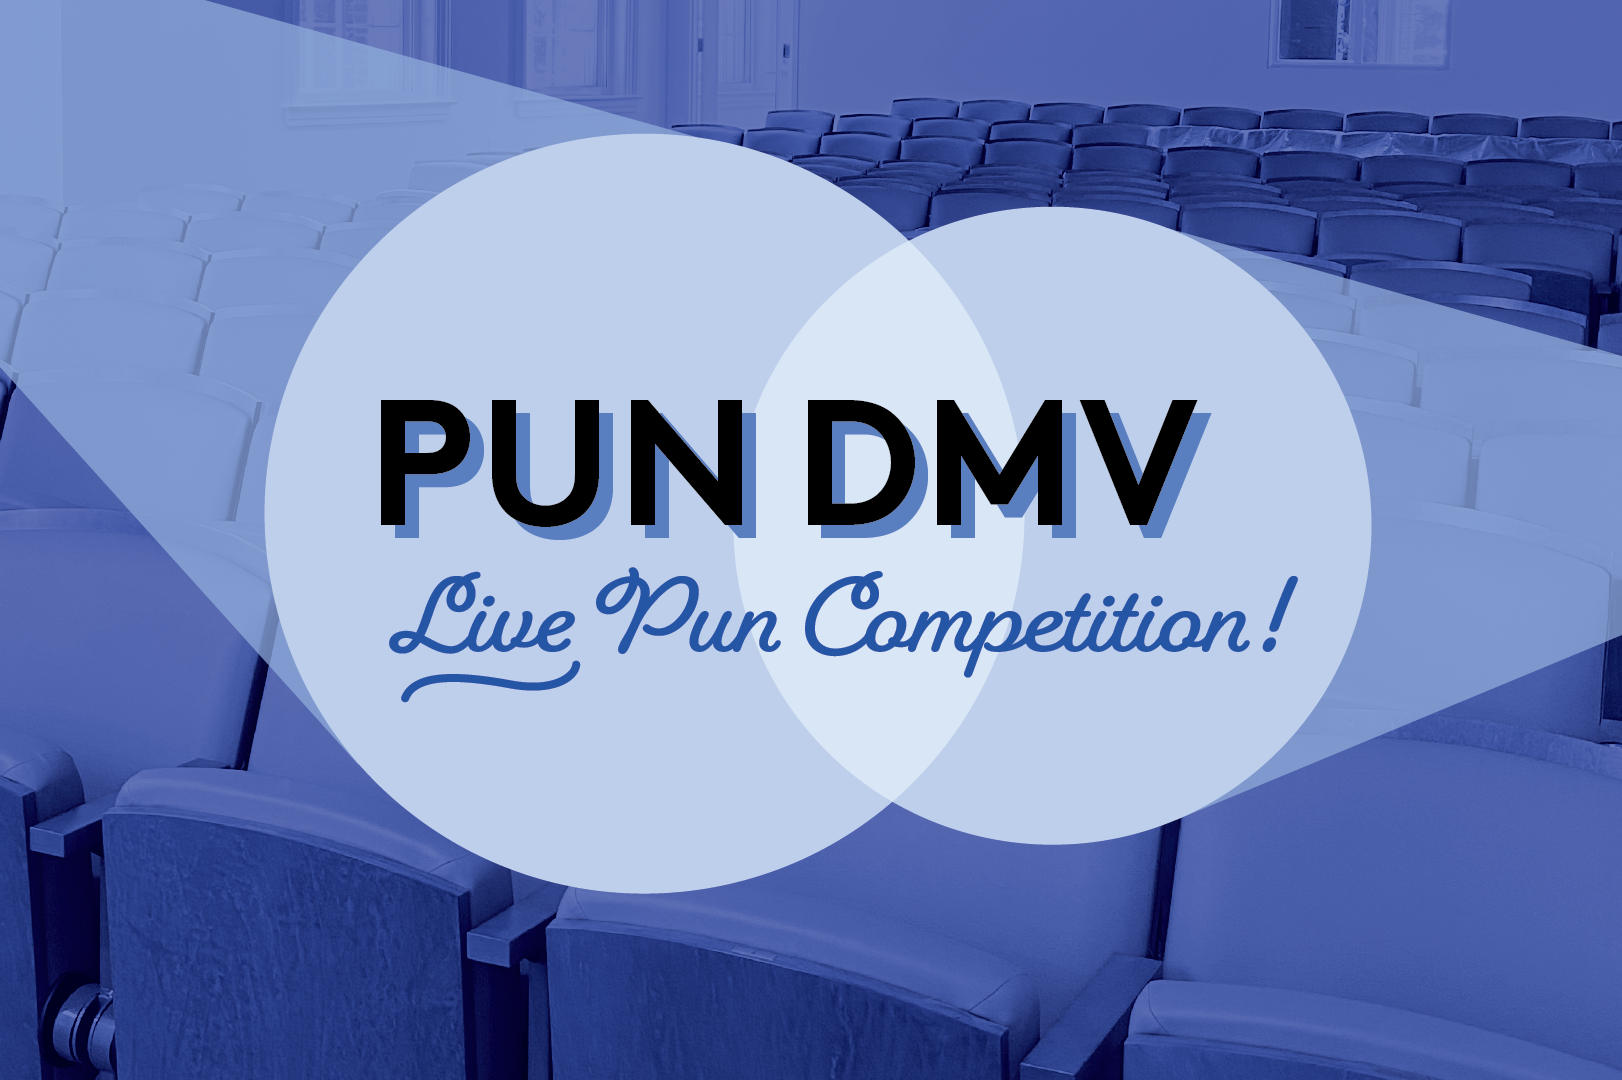 Planet Word’s Live Pun Competition 8.13